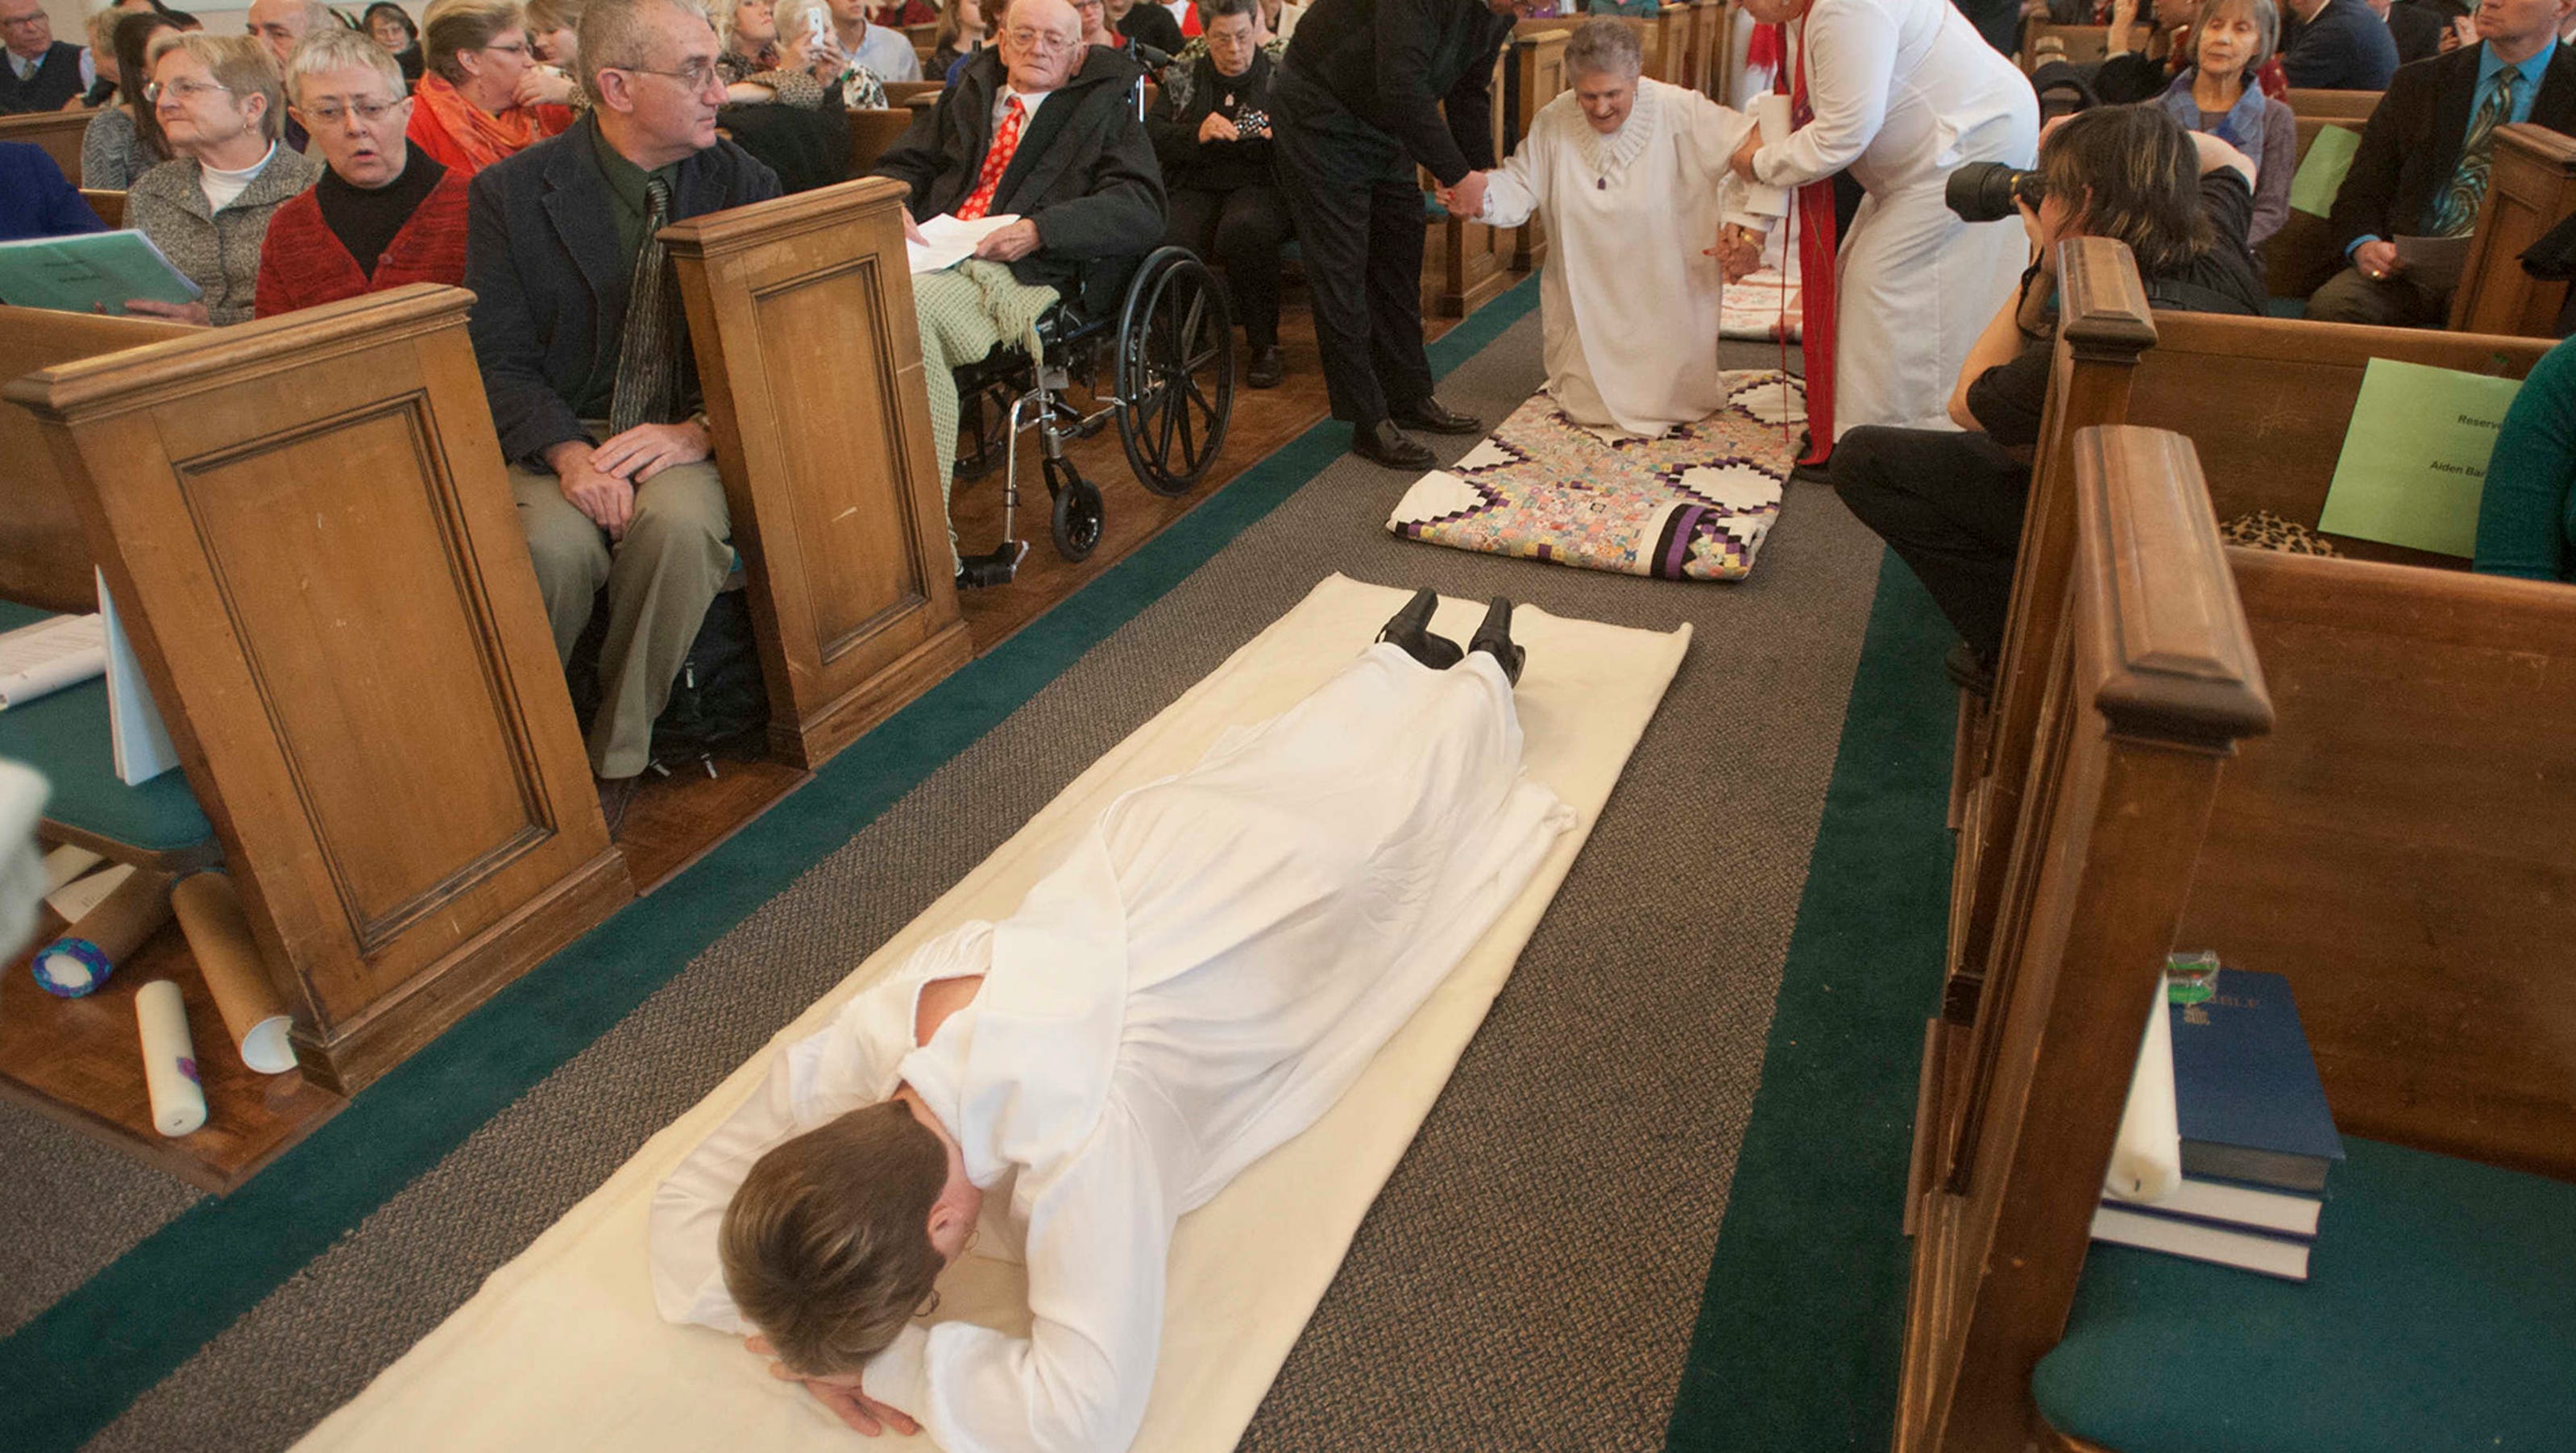 Catholic Women Ordained Priest And Deacons In Ky